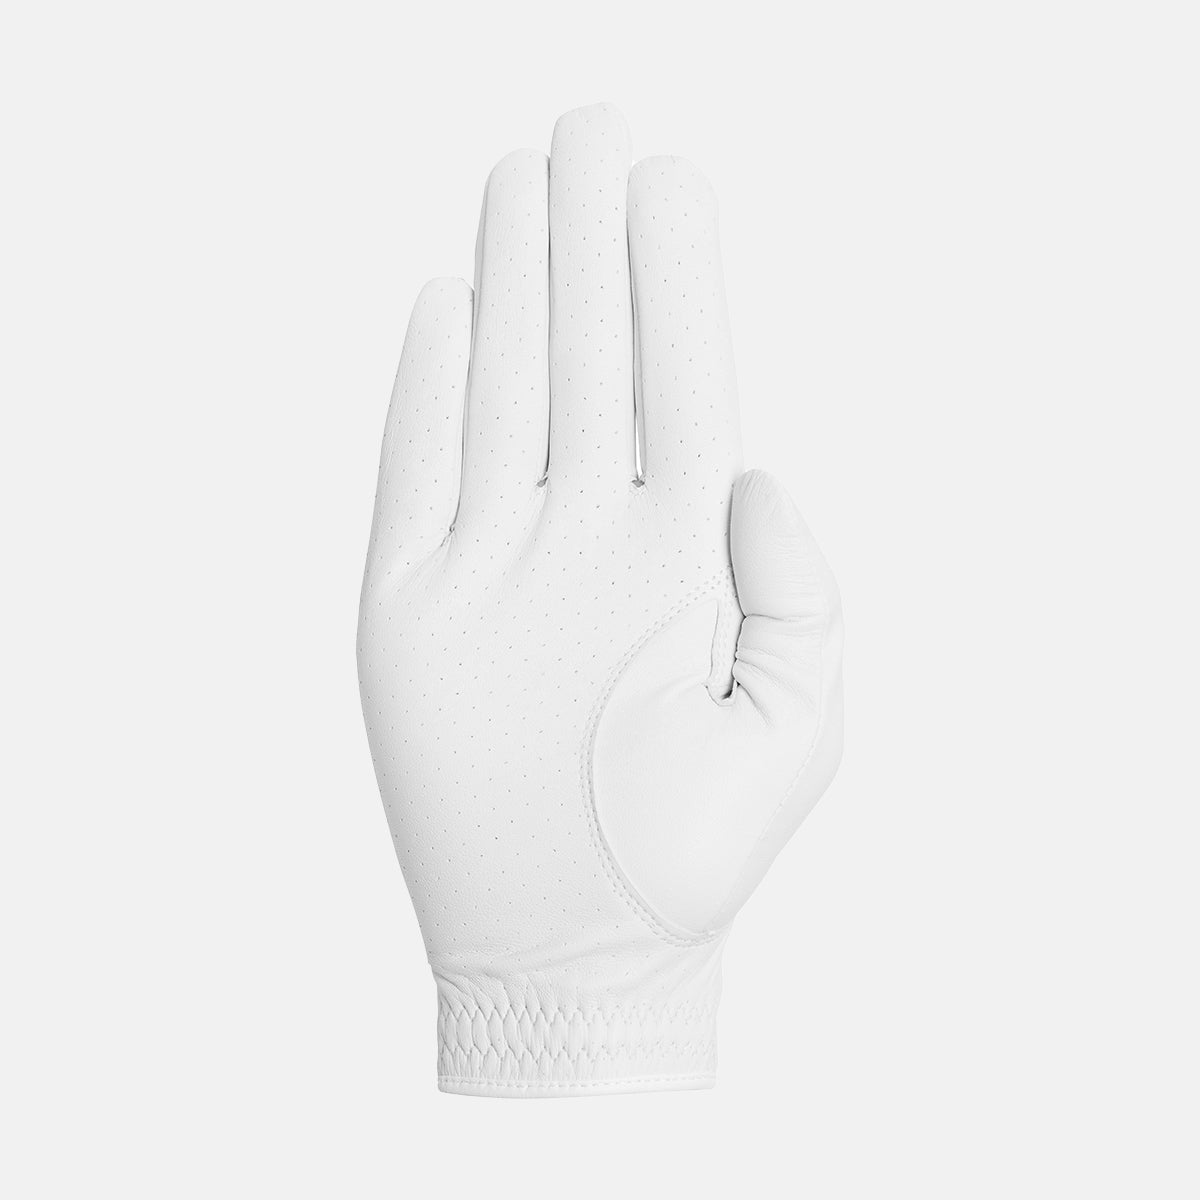 Brompton Men's Glove Right in colors White/Navy made from 100% cabretta leather and microfiber